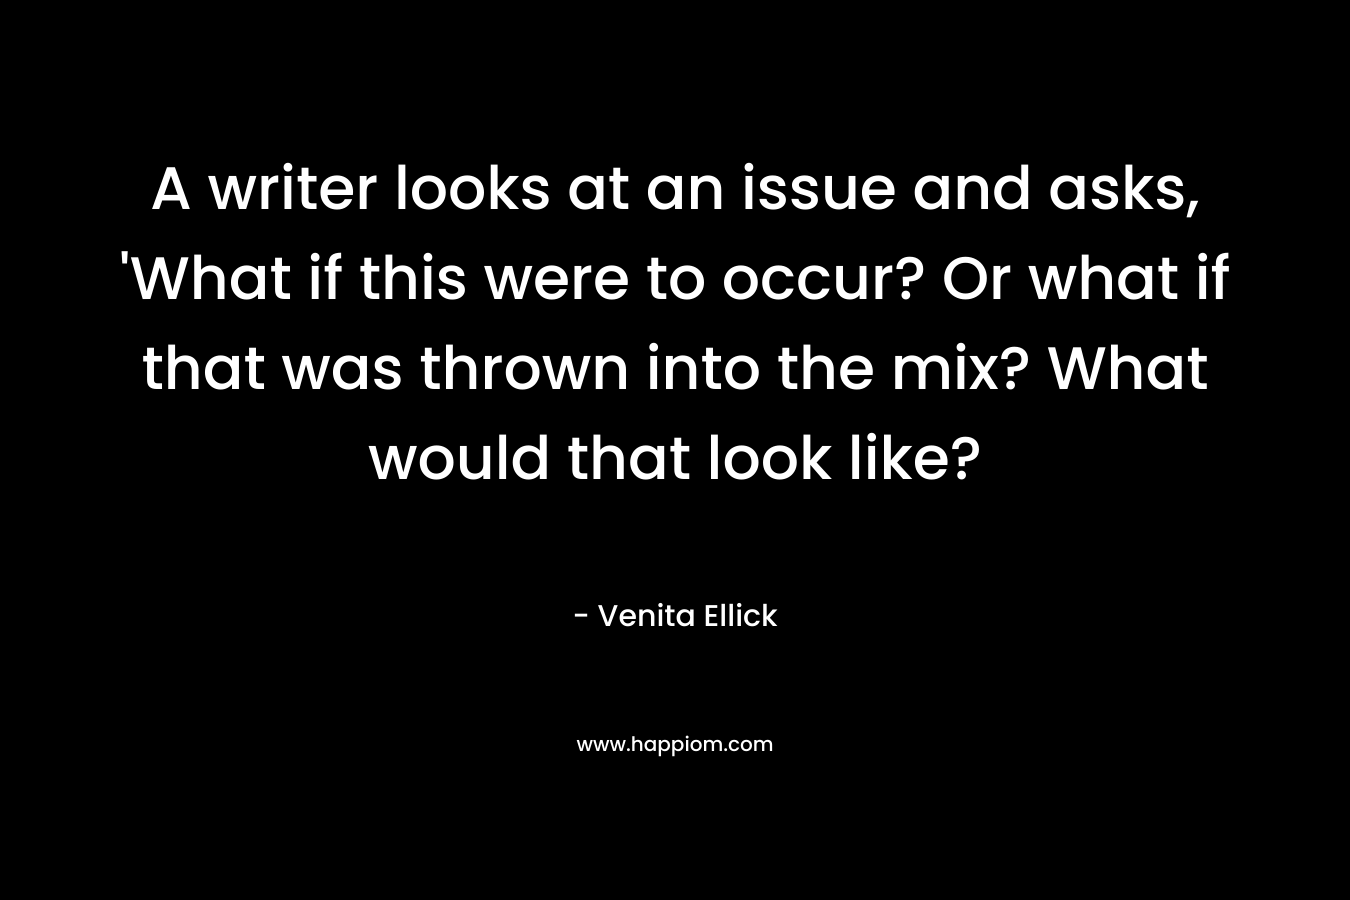 A writer looks at an issue and asks, ‘What if this were to occur? Or what if that was thrown into the mix? What would that look like? – Venita Ellick